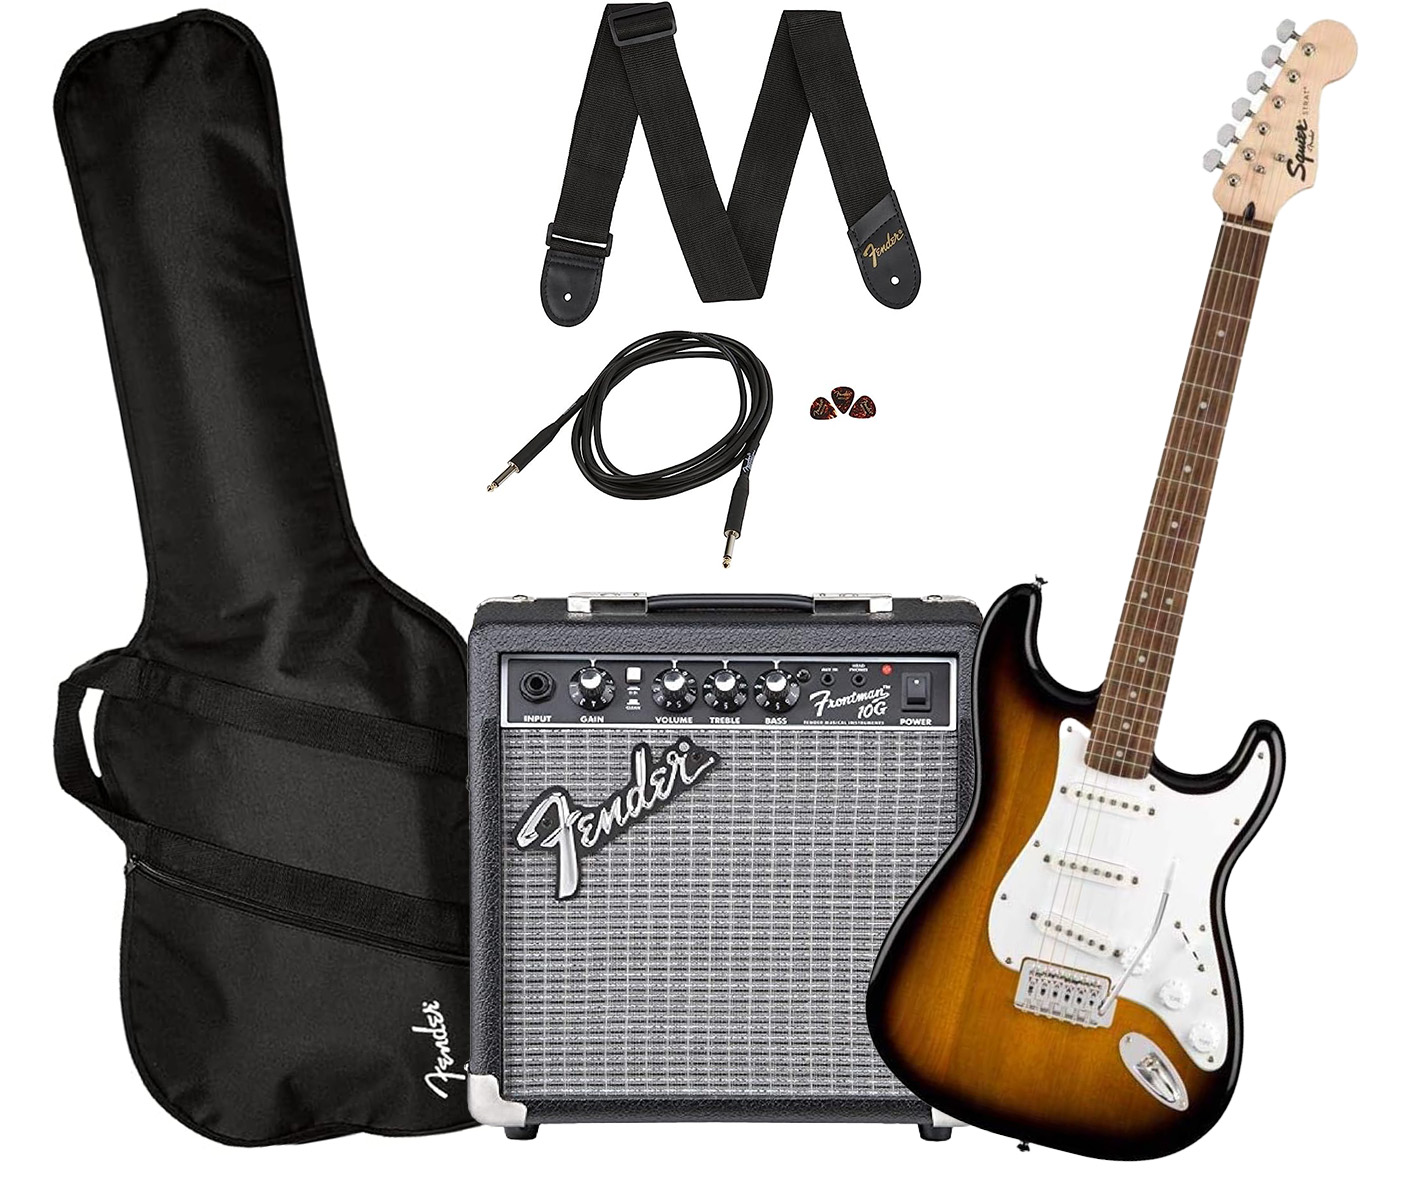 Squier Stratocaster Electric Guitar Pack on a white background